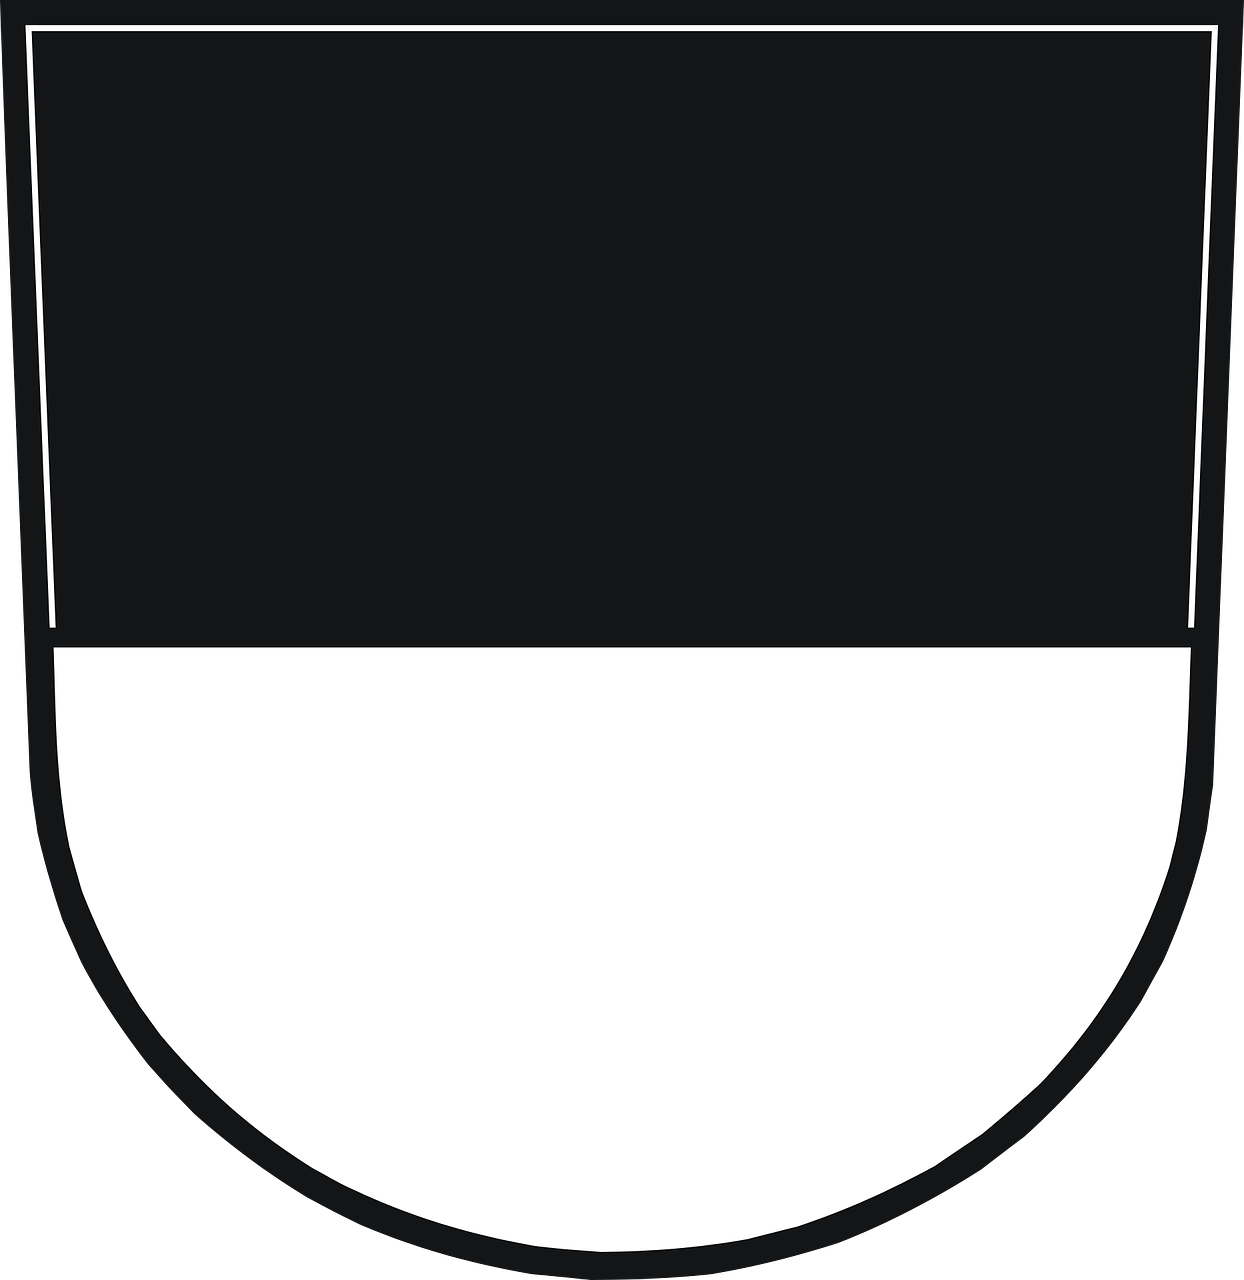 ulm coat of arms crest free photo